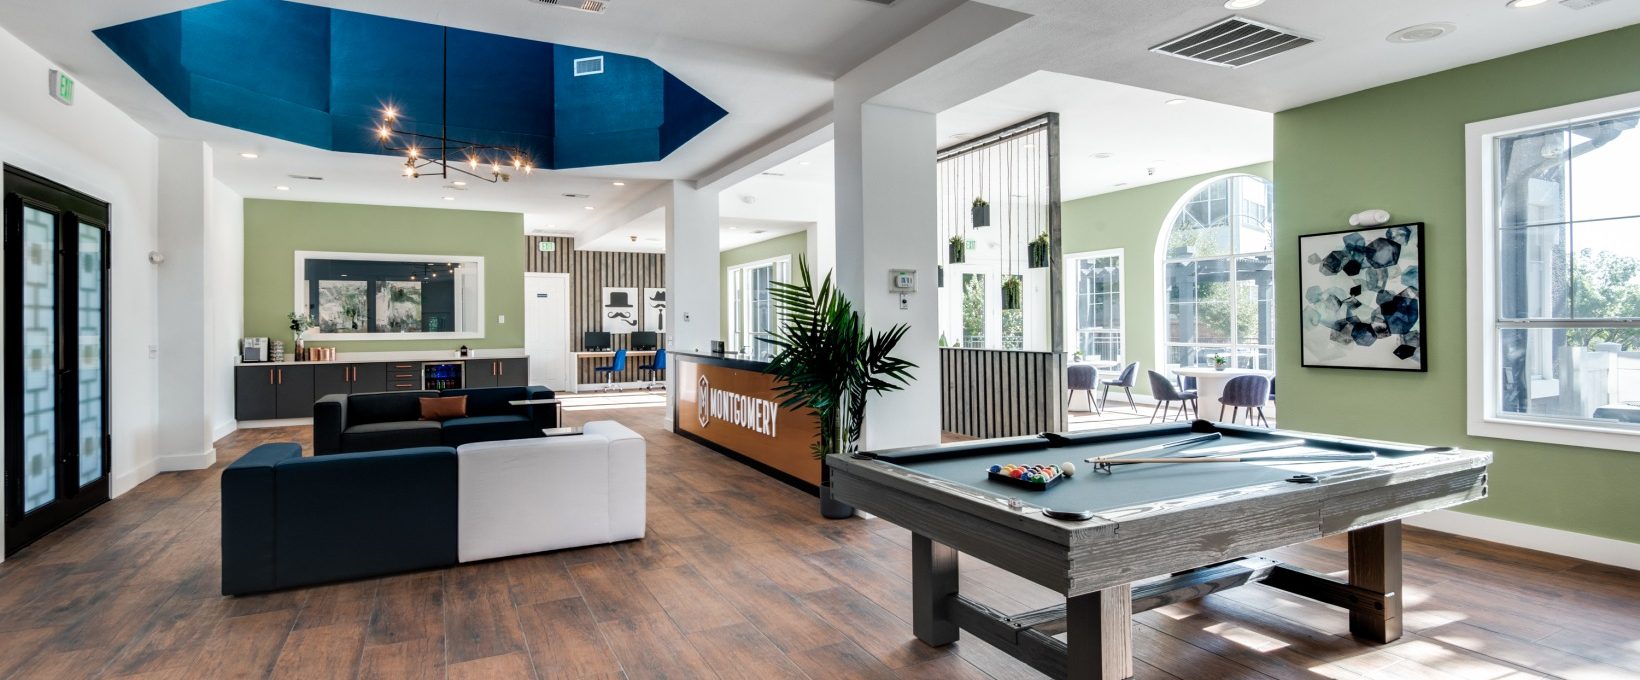 pool table in a living room with a blue ceiling at The  Montgomery